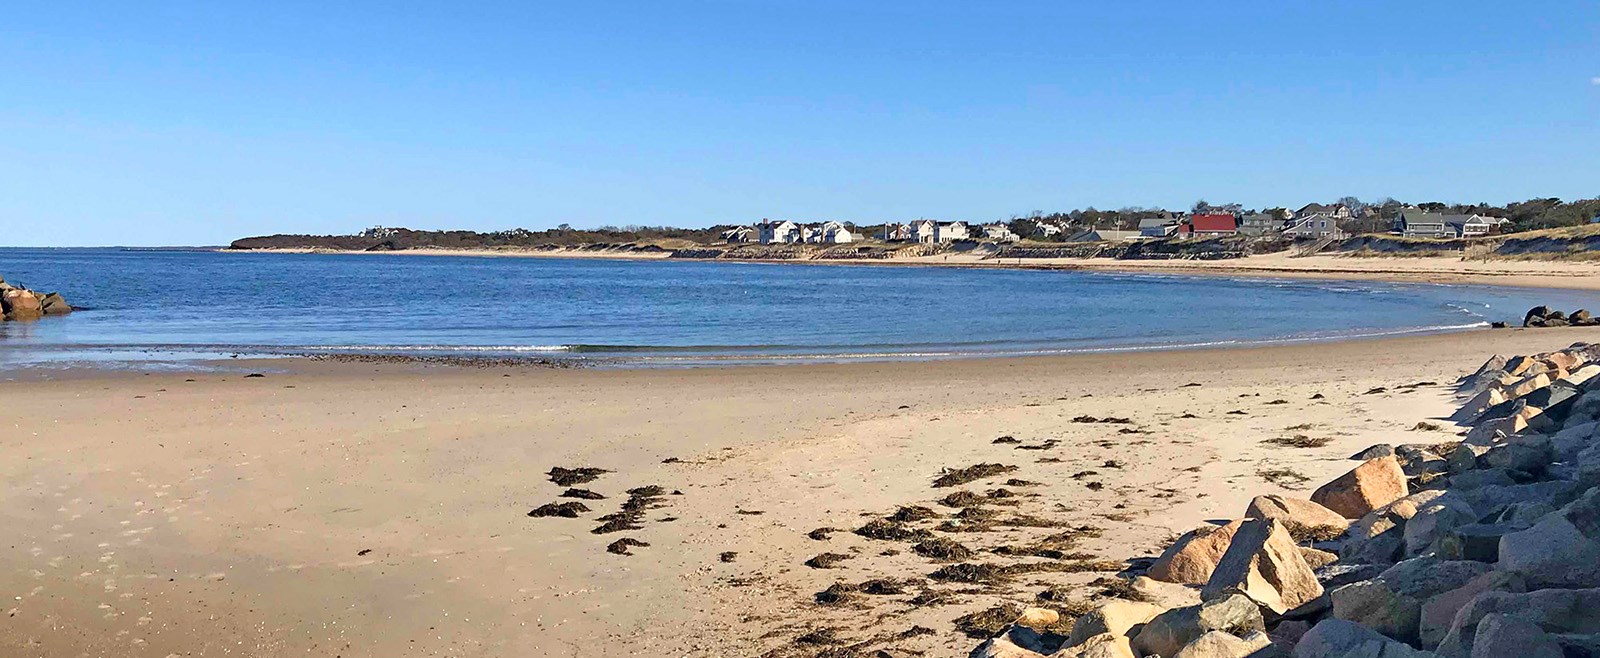 Guest blogger, Elizabeth Ricketson, shares her special moments on Cape Cod in the off-season.